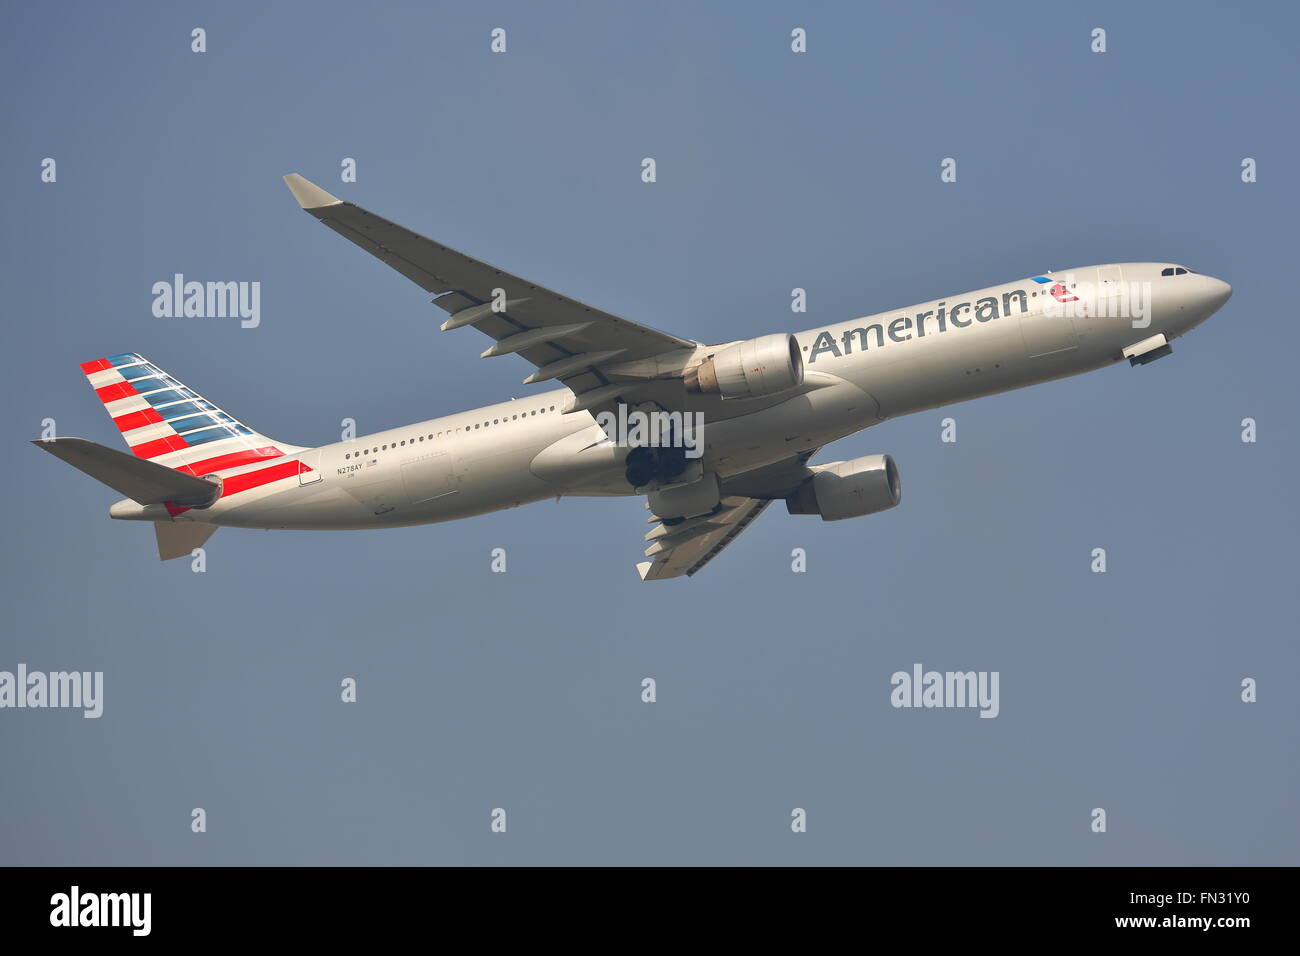 american airlines 3203